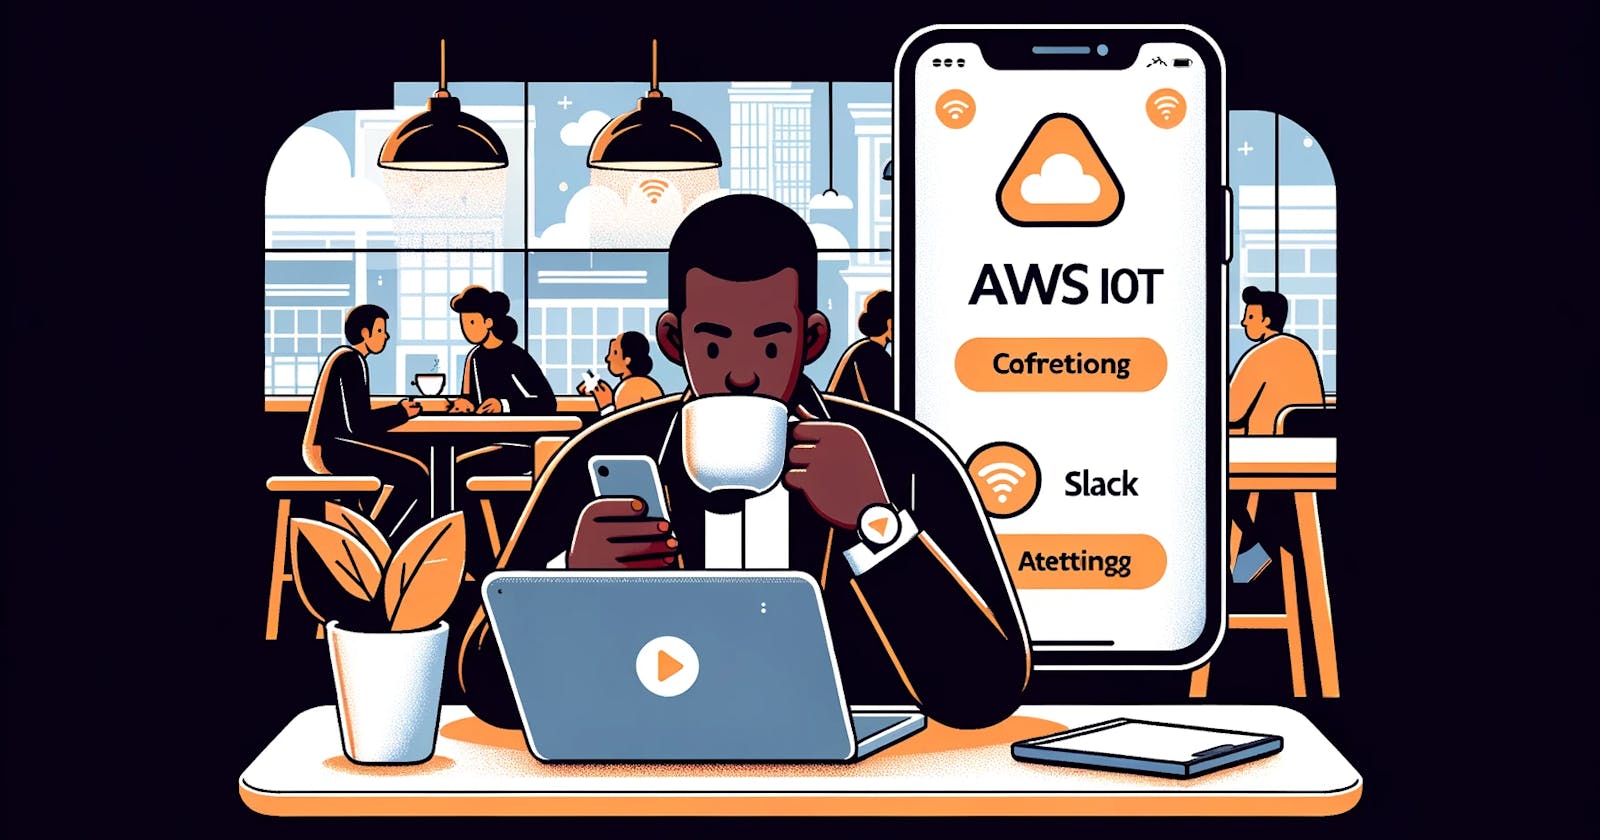 Best of all: Automatic log output scheme for AWS IoT solutions